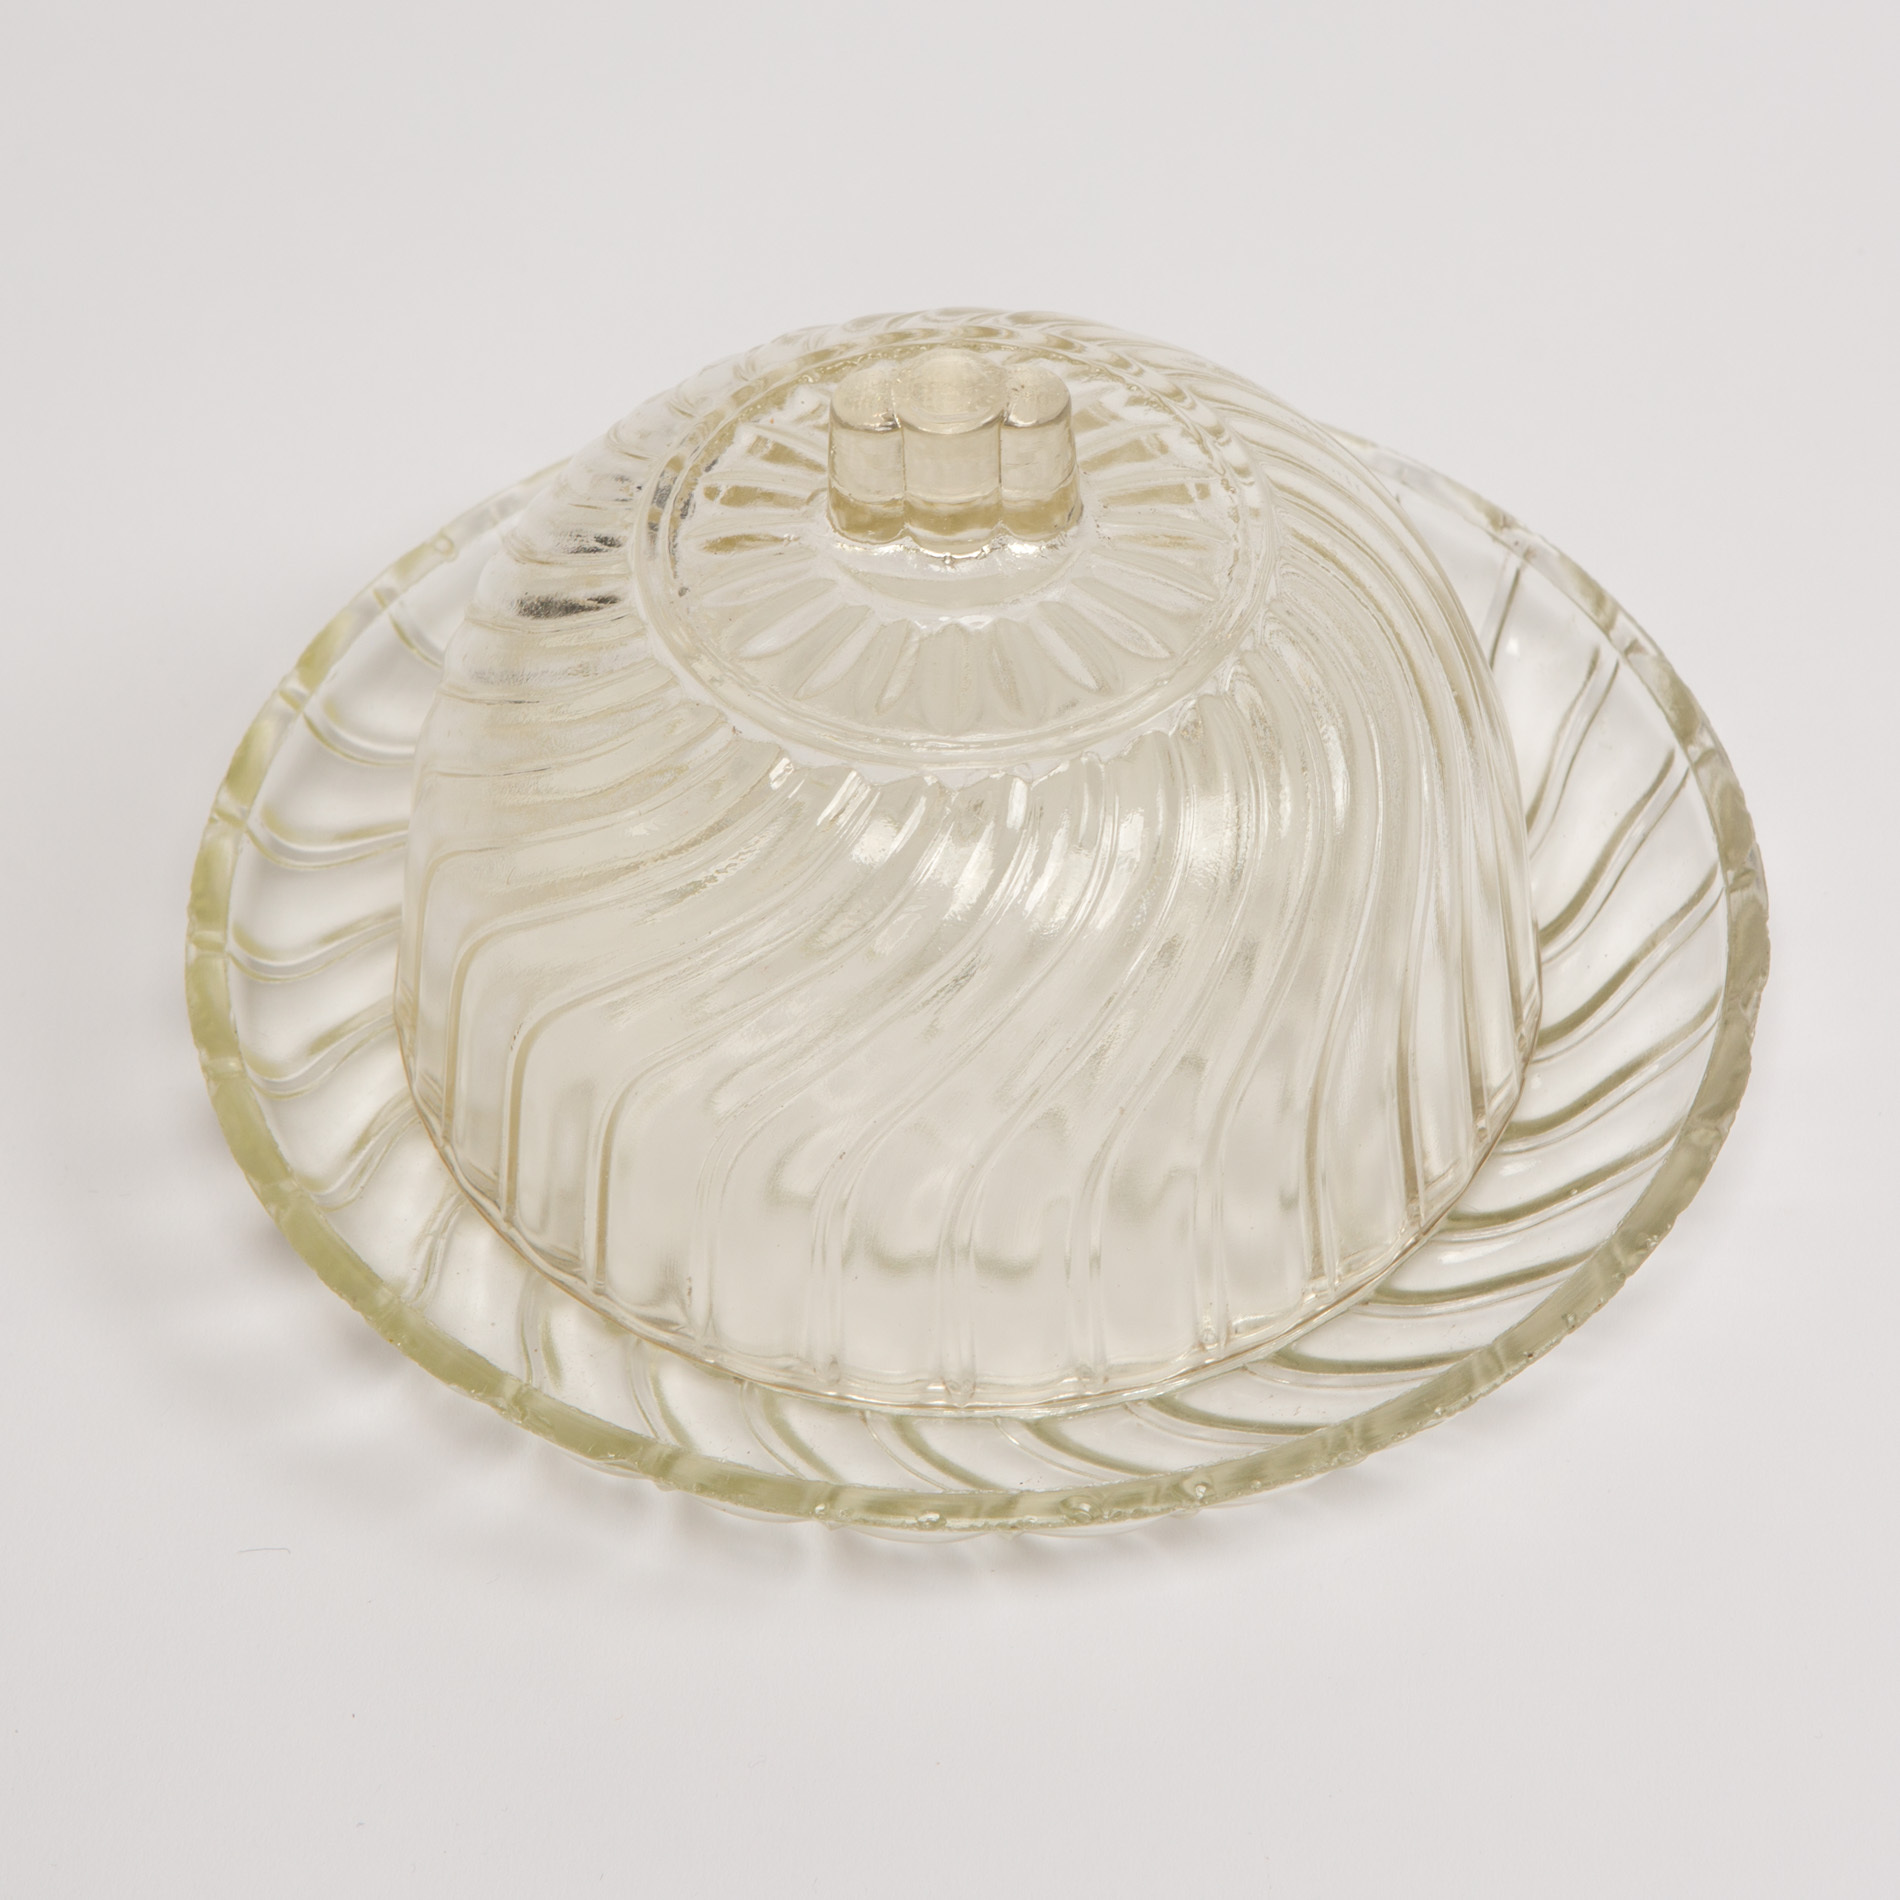 The image for Glass Cheese Dish00002